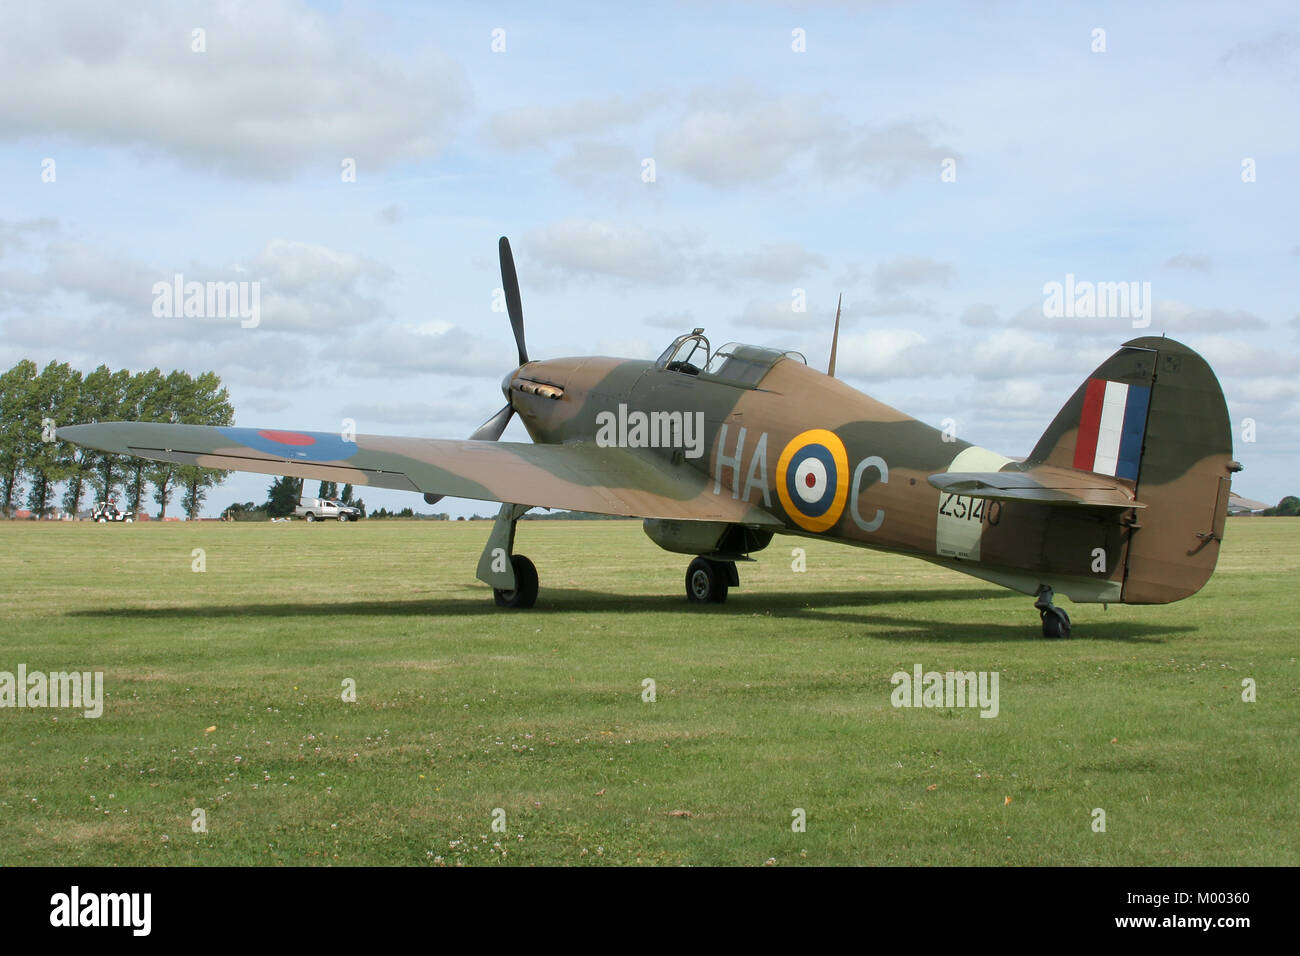 The Historic Aircraft Collections vintage Hawker Hurricane Mk XII sits on the grass during a Rougham airfield airshow prior to displaying. Stock Photo